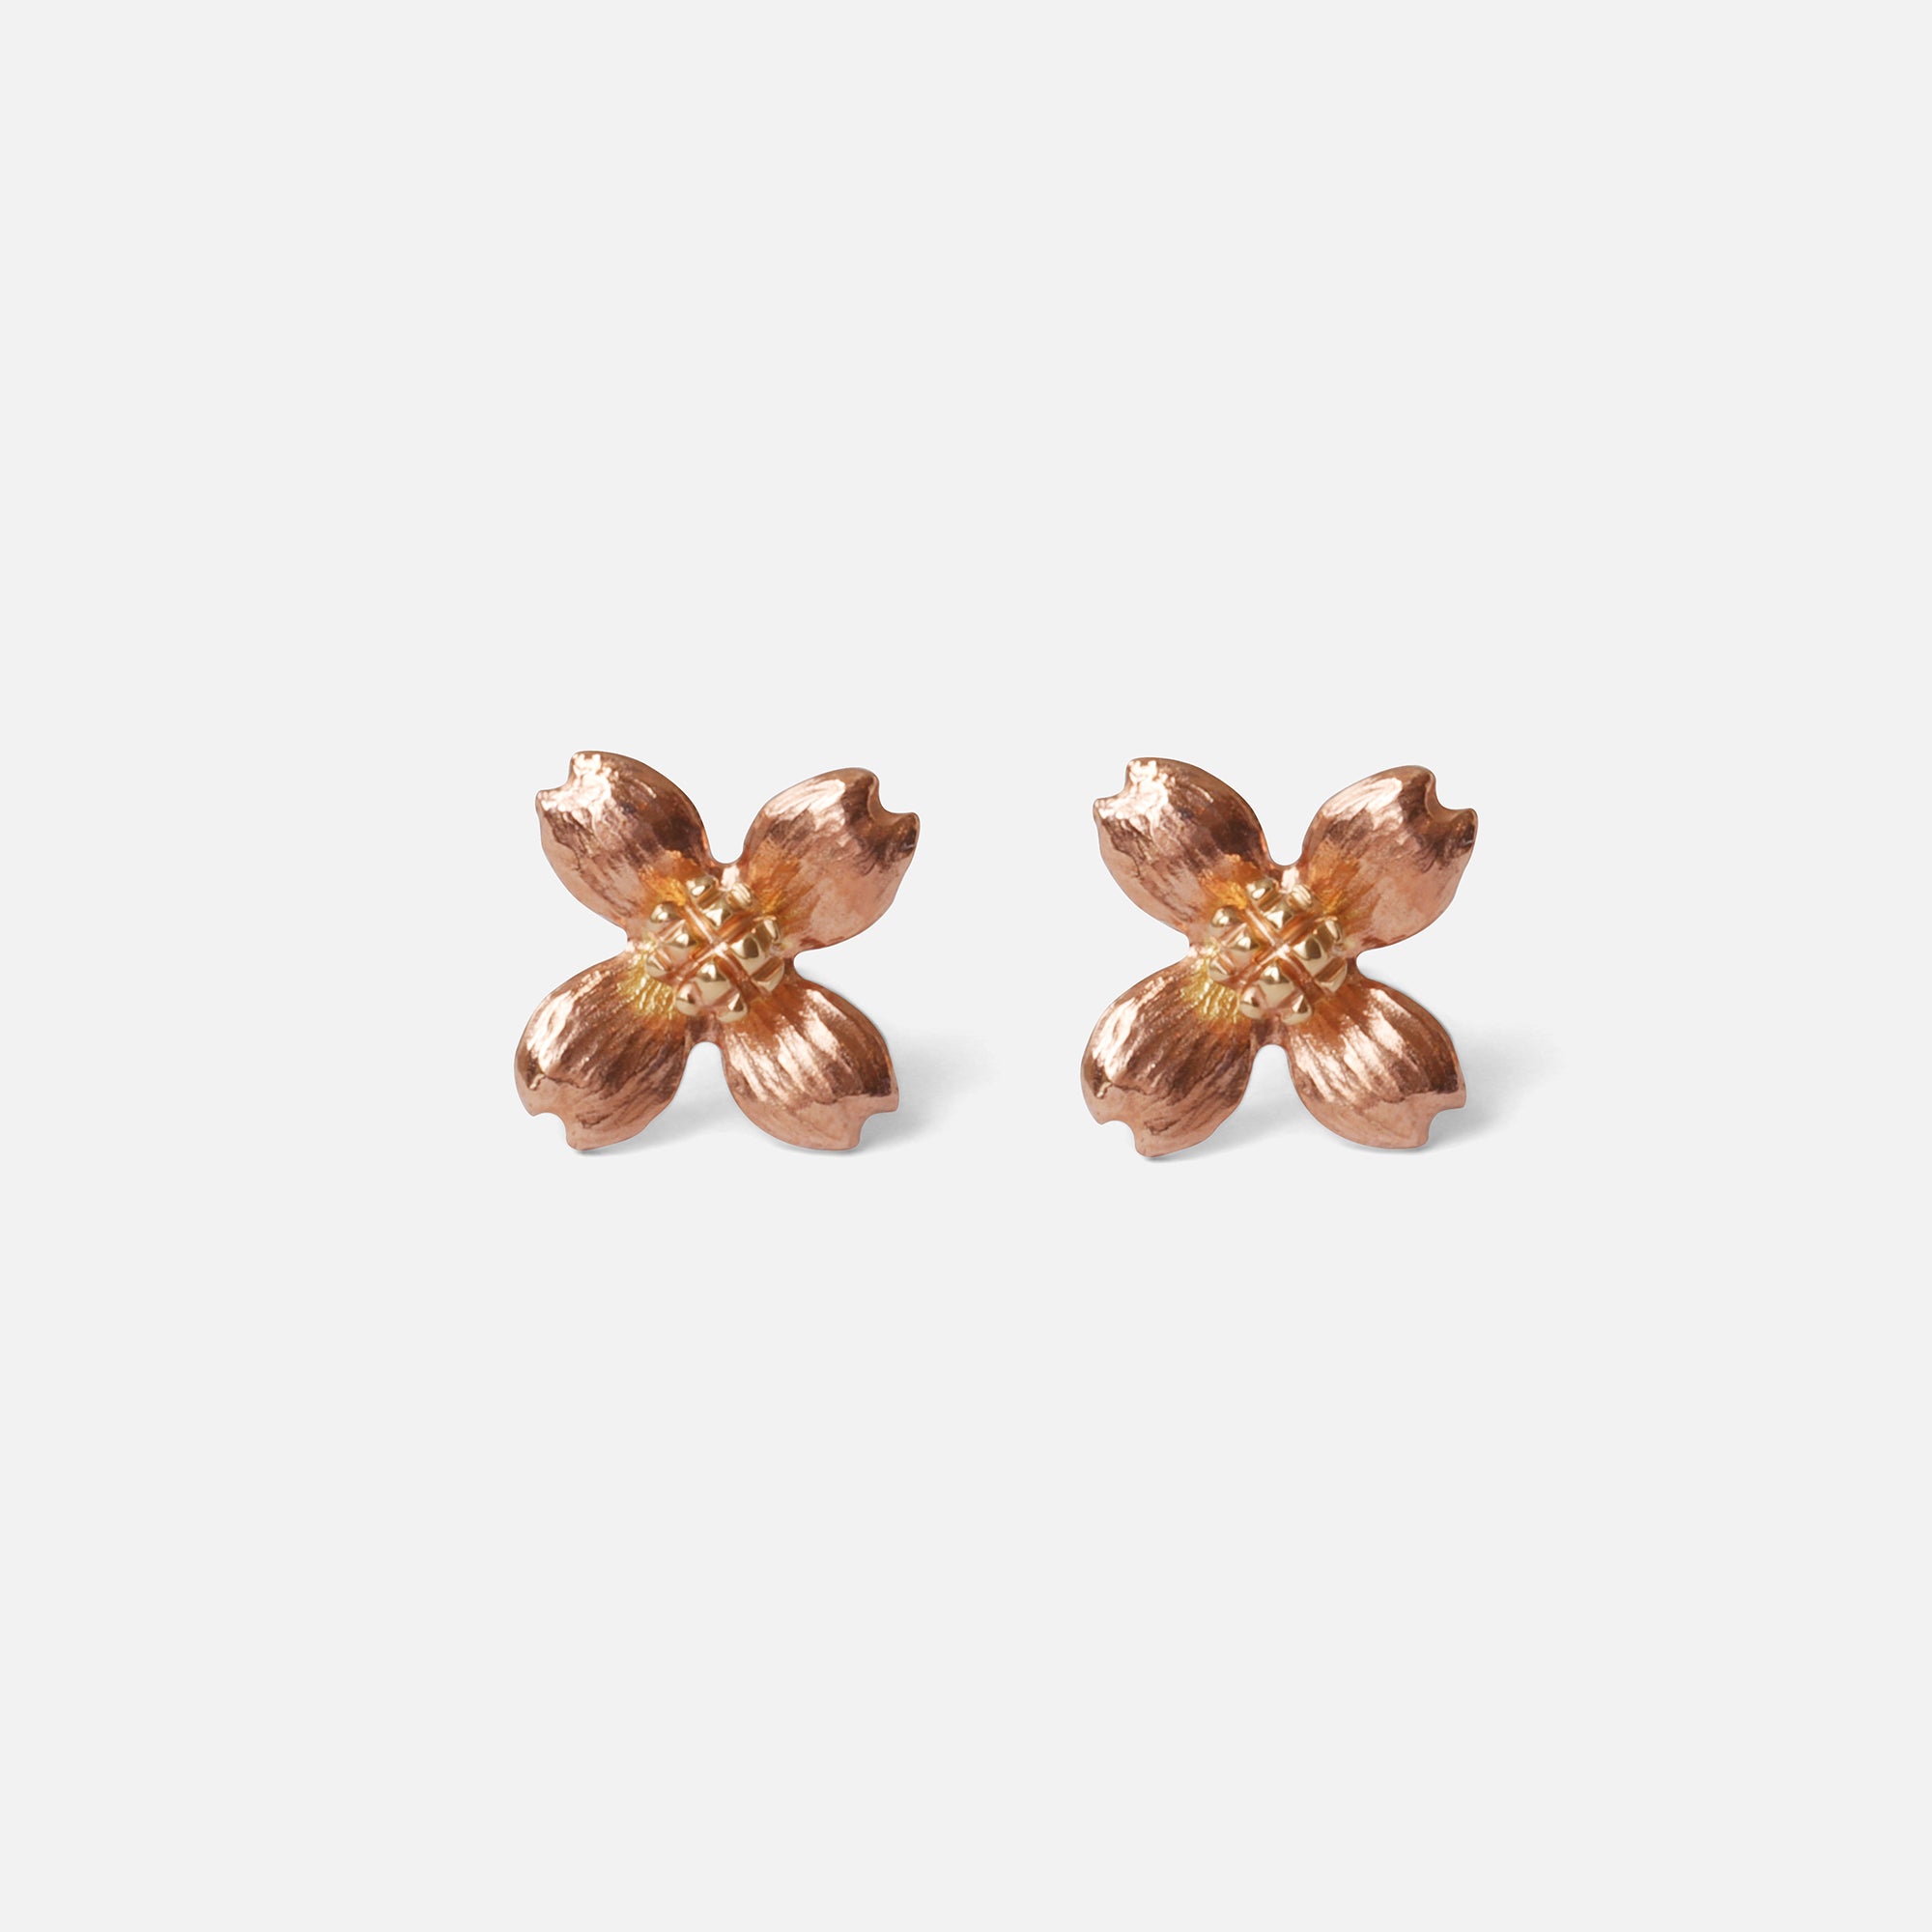 Dogwood Studs By O Channell Designs in earrings Category